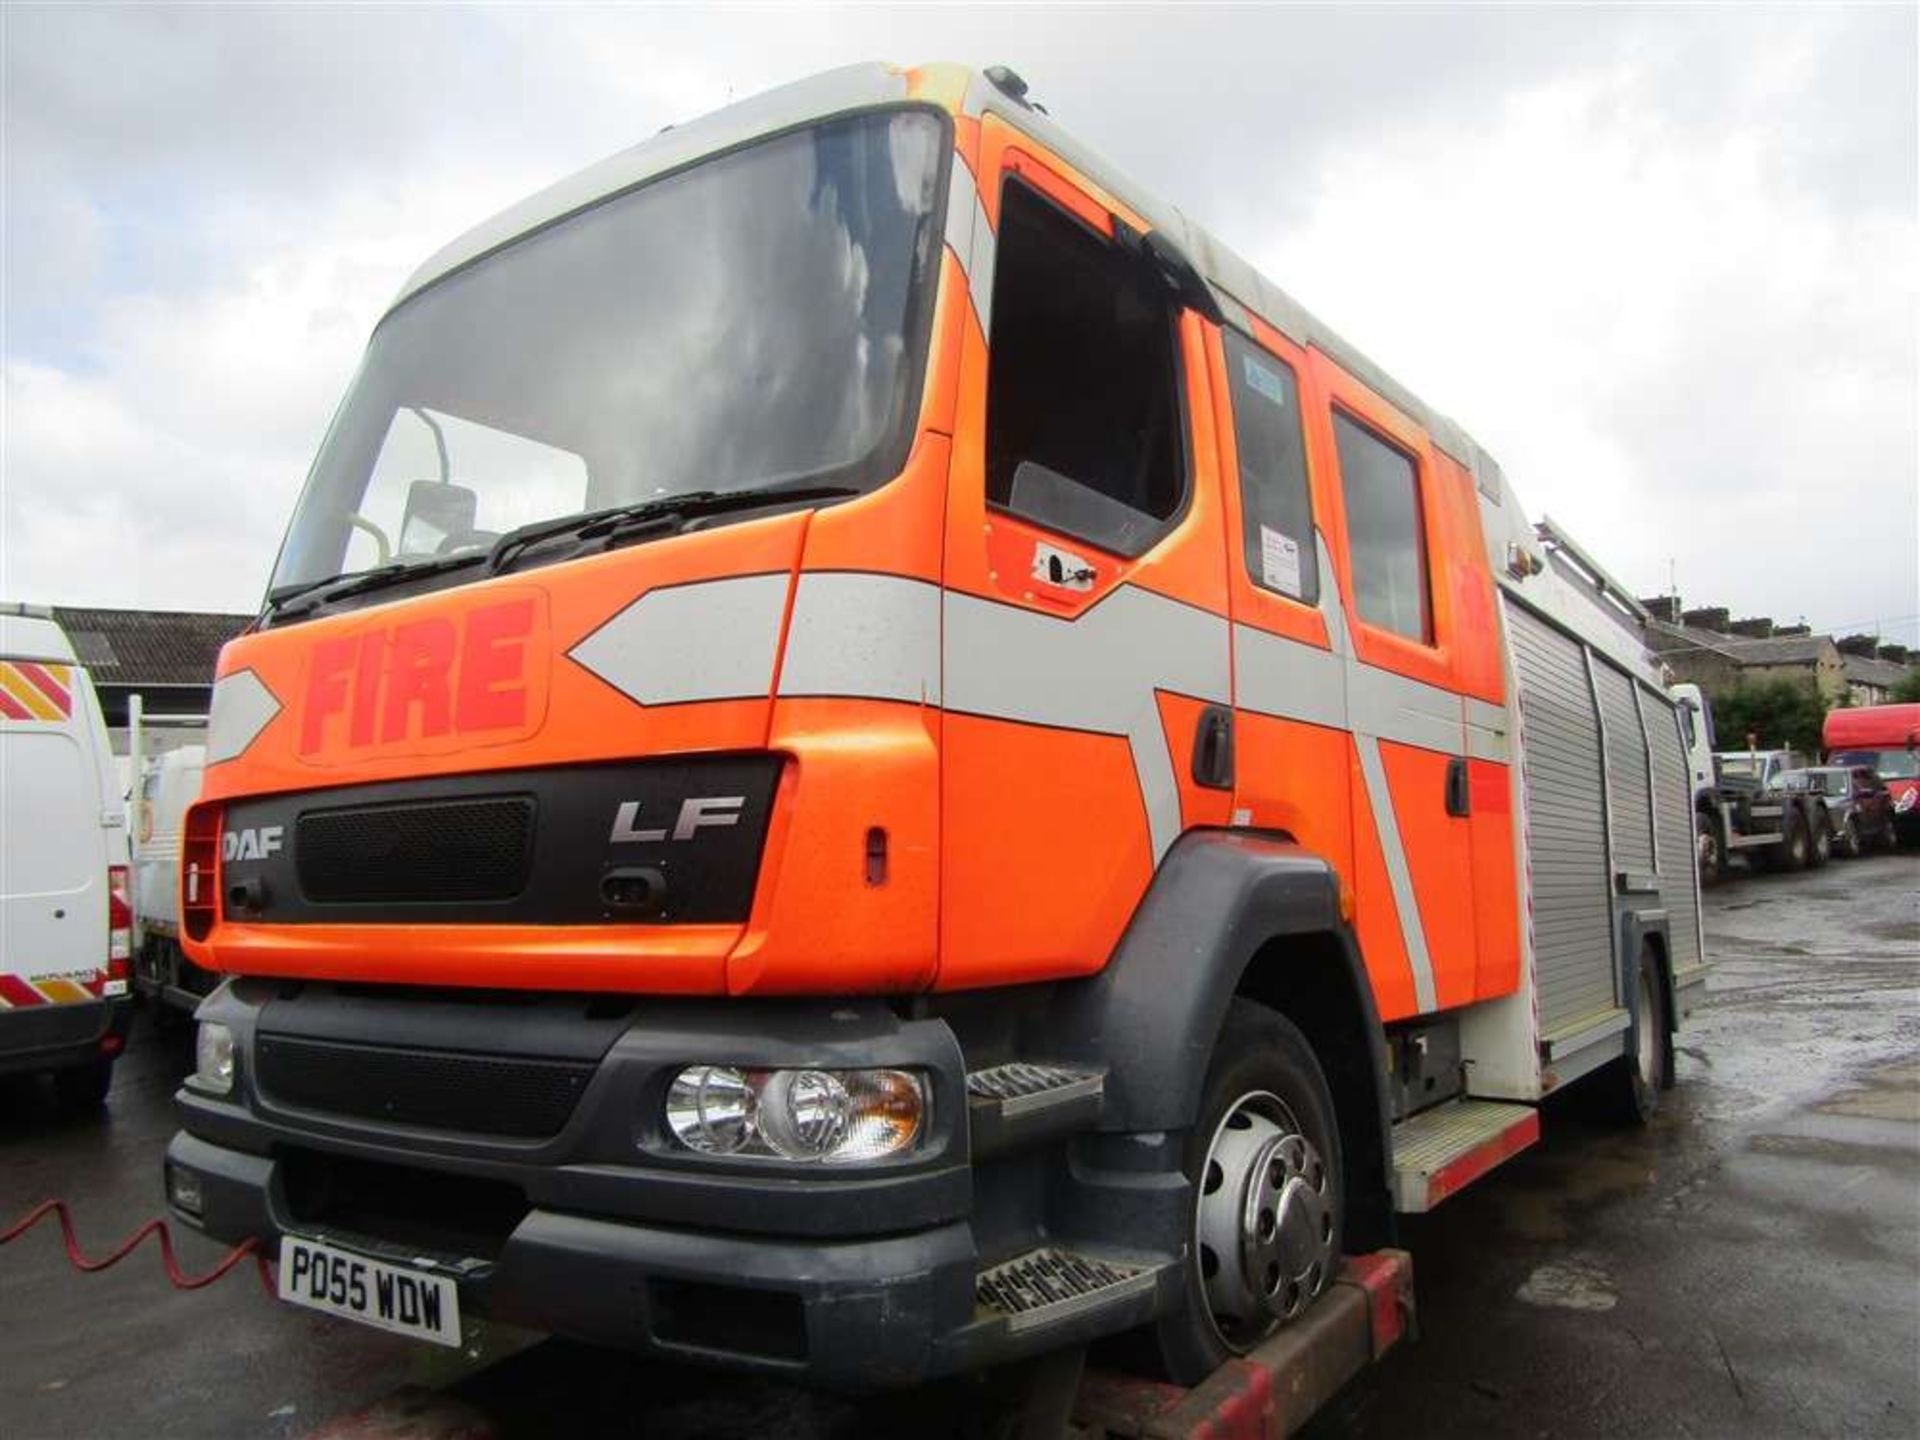 2006 55 reg DAF FA CF65.250 Fire Engine (Non Runner) (Direct Lancs Fire & Rescue) - Image 2 of 6